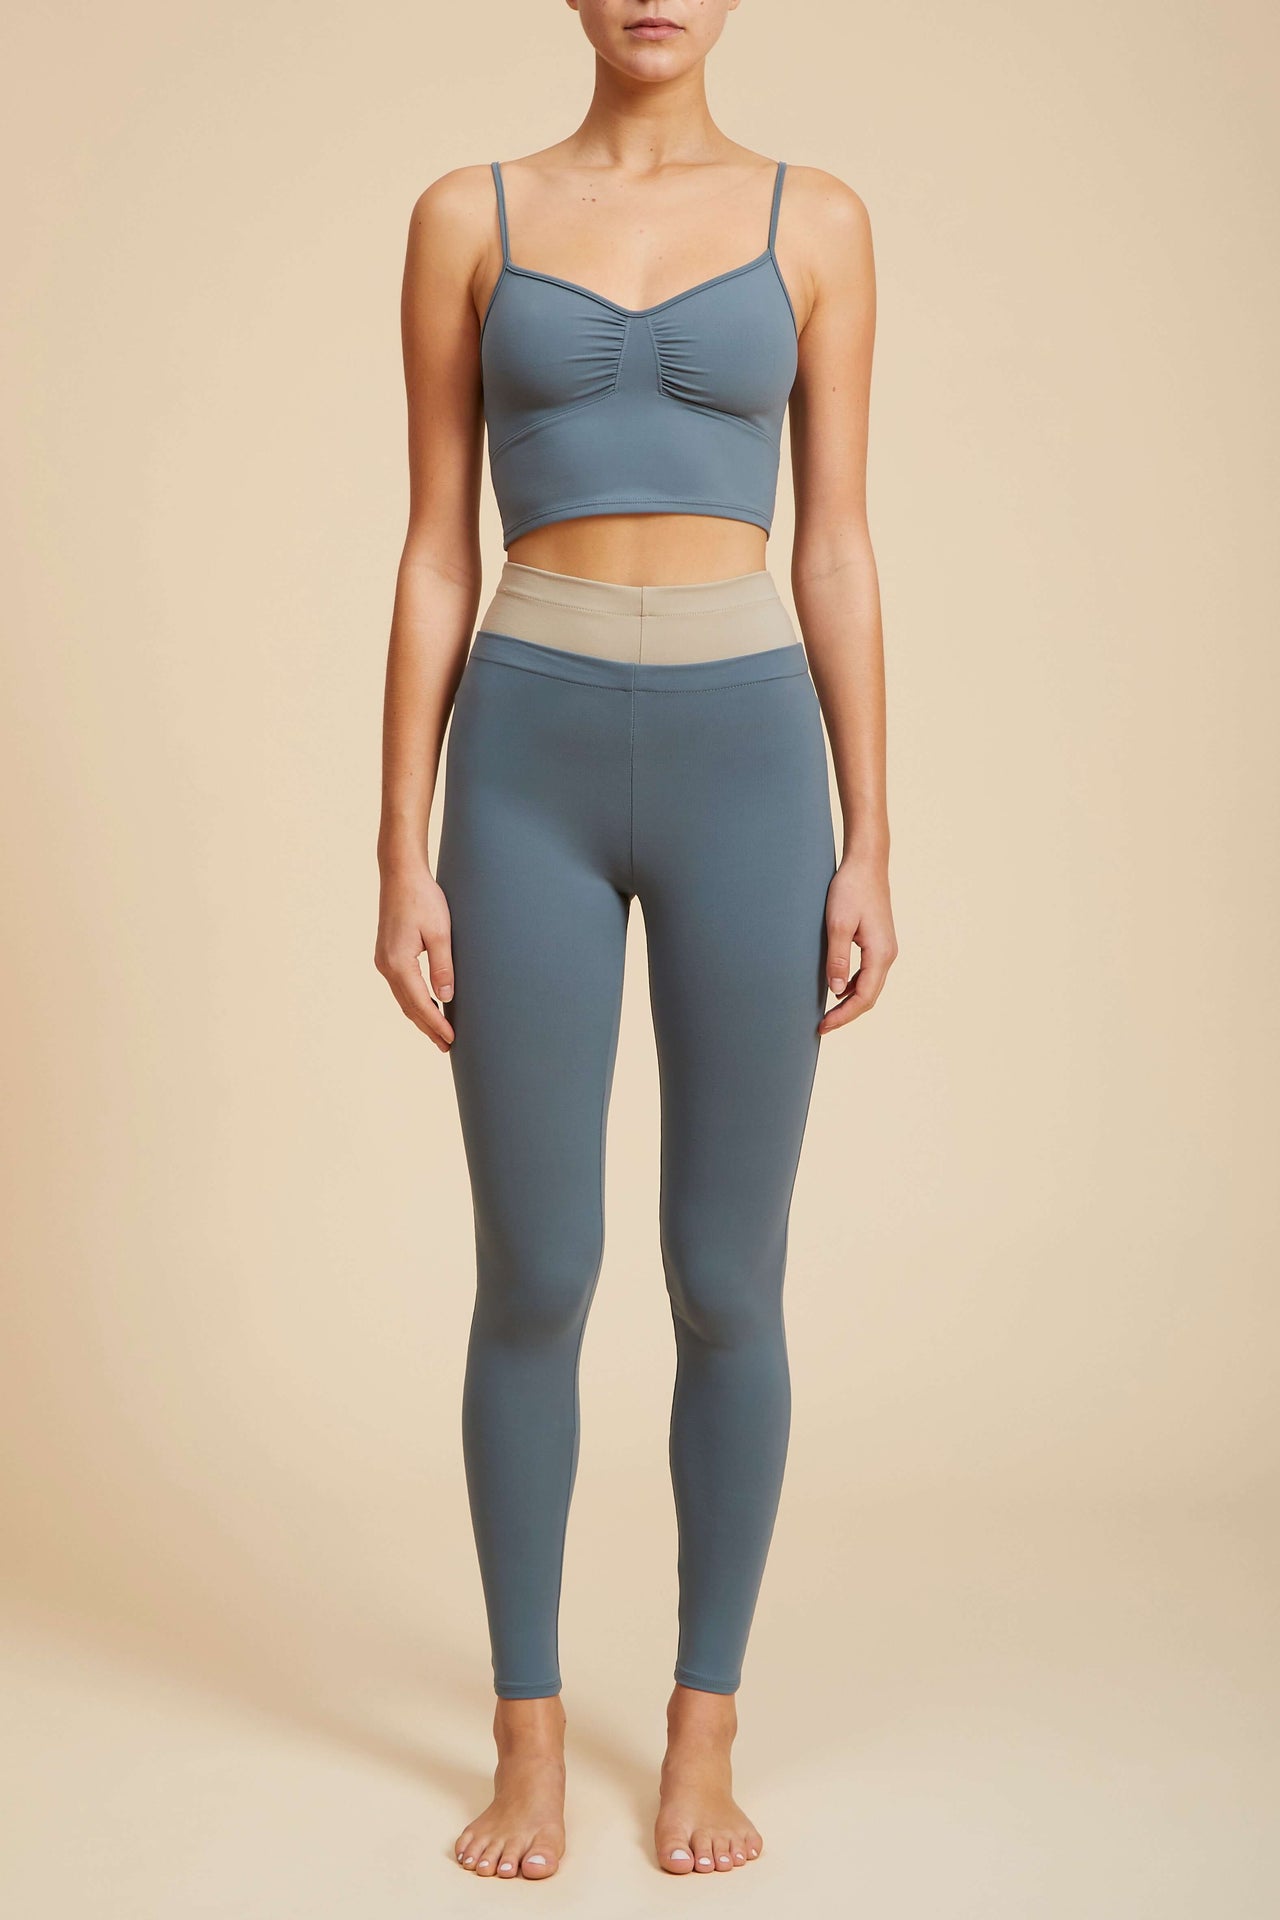 Live The Process Vega Top. Peak performance. Keep it simple in our supportive Vega Top, featuring ruching at the bust.